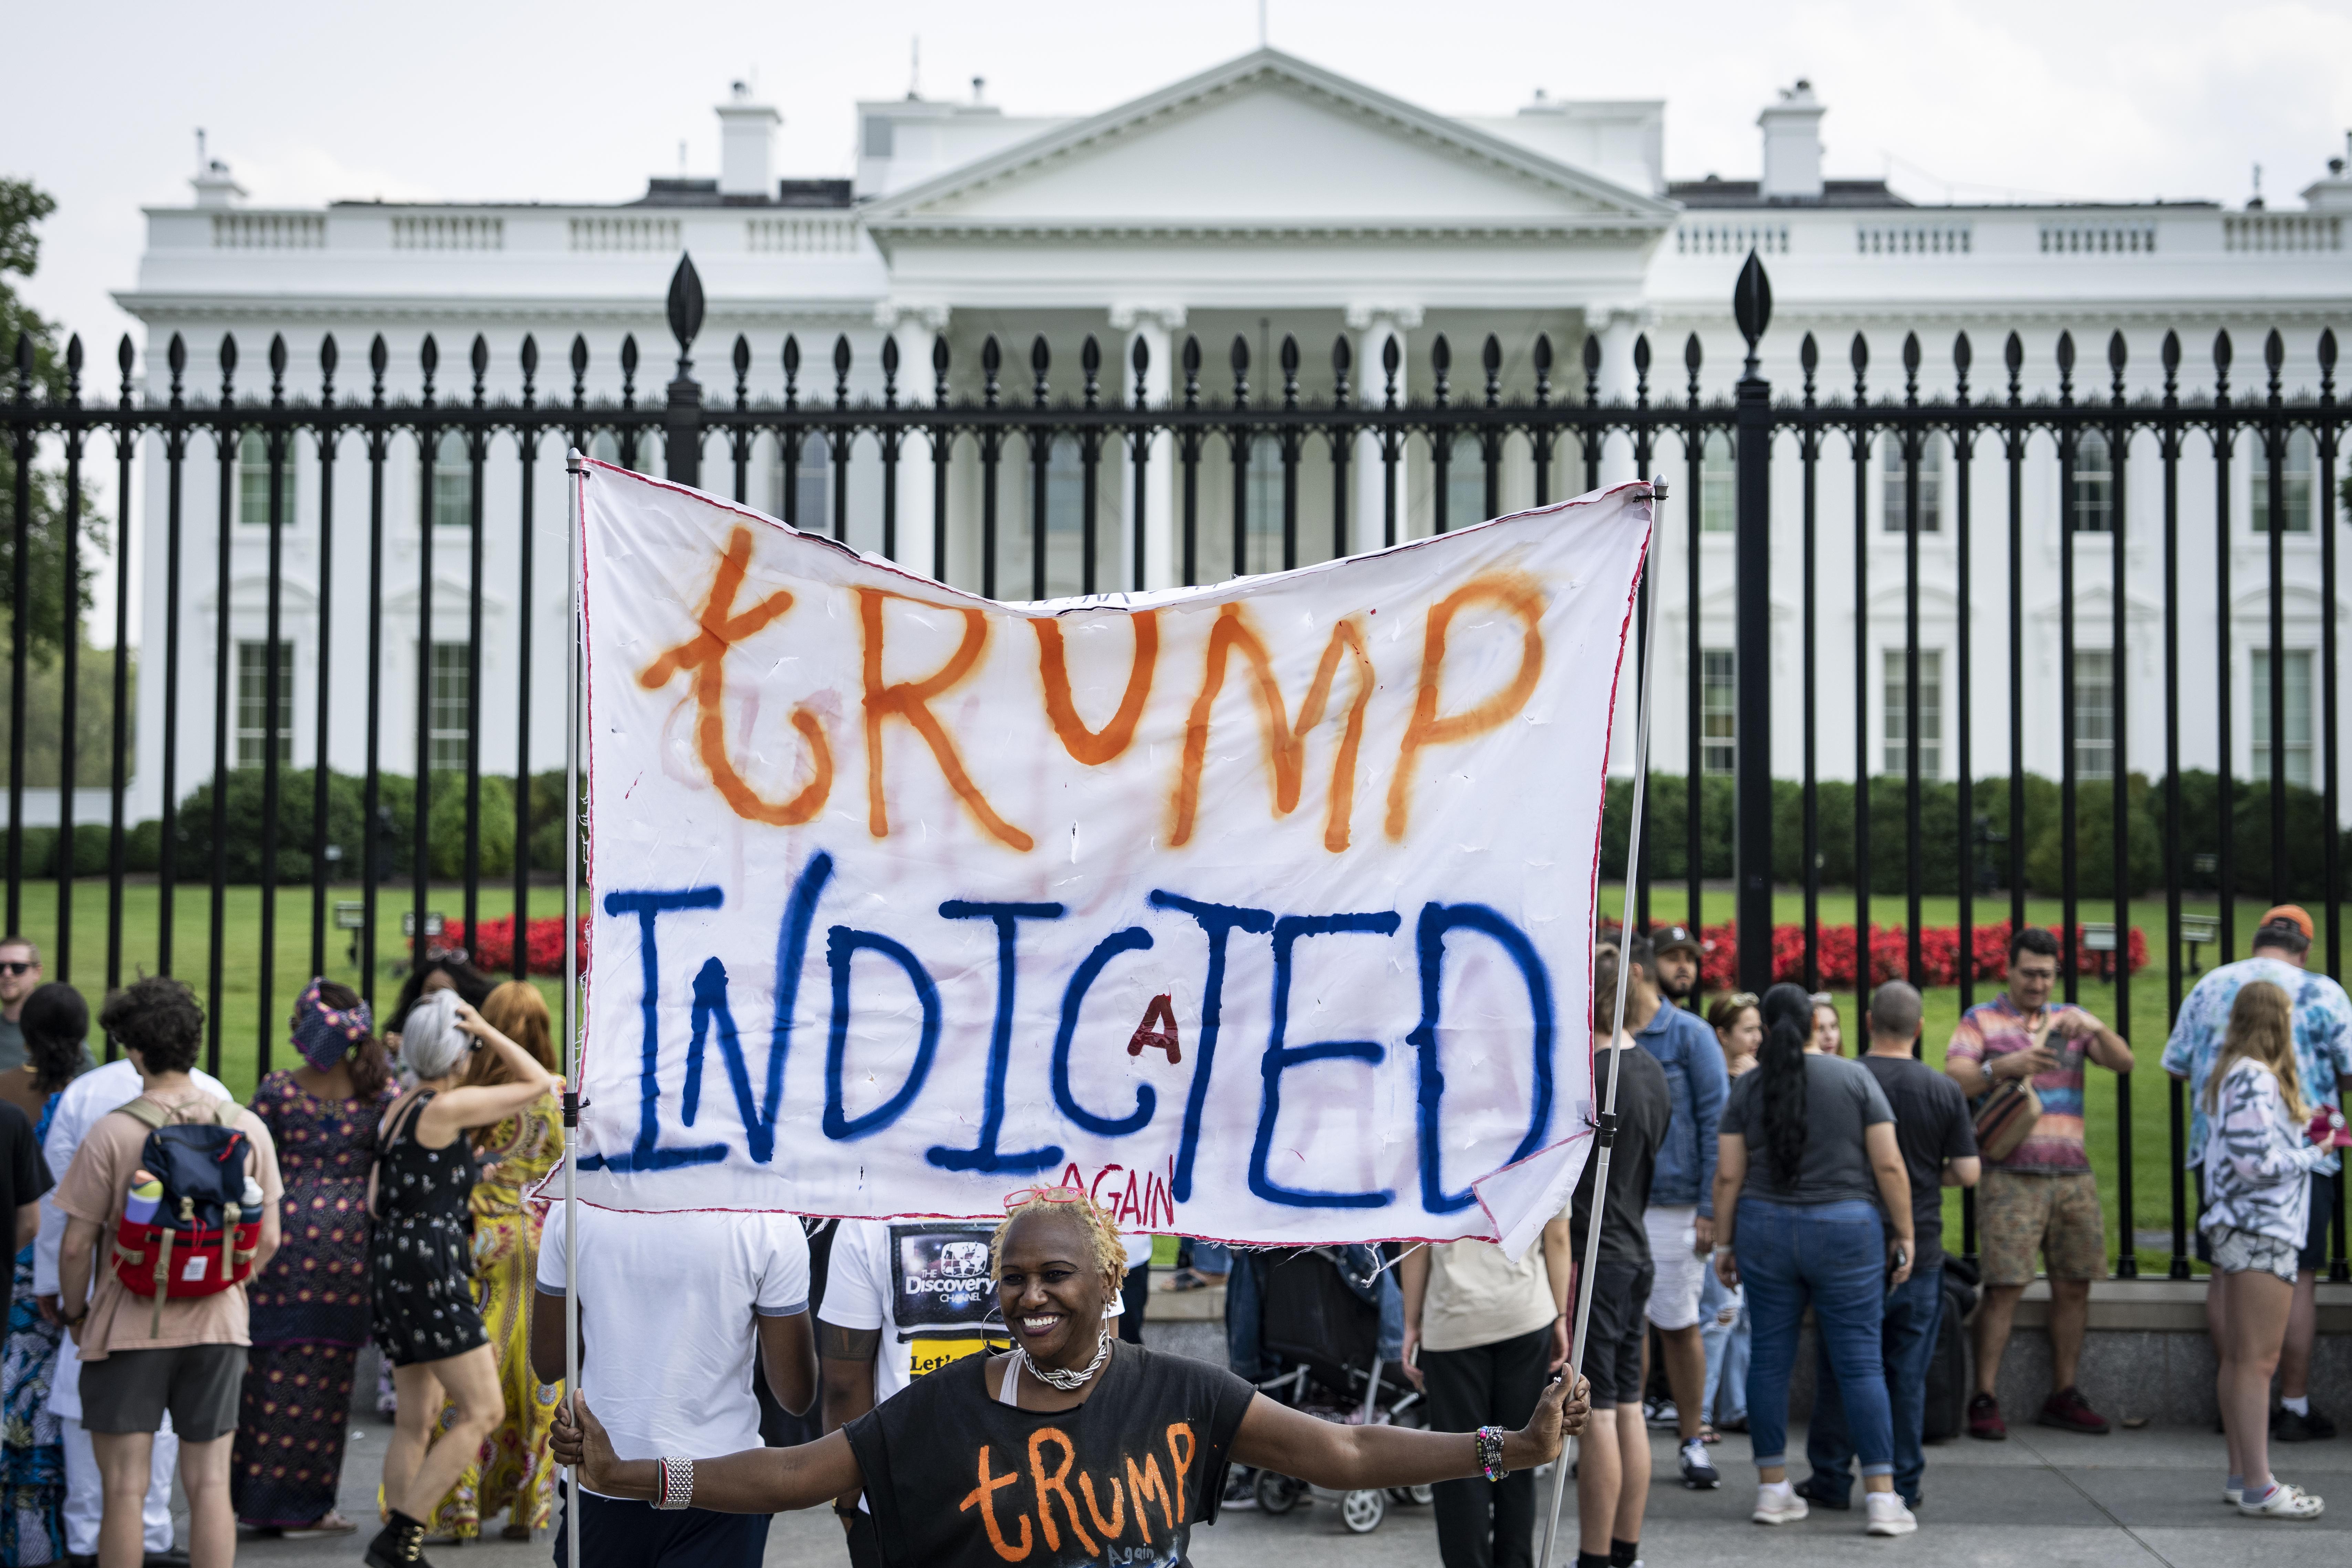 Donald Trump’s second indictment – this time in federal court David Plotz, Emily Bazelon, and John Dickerson